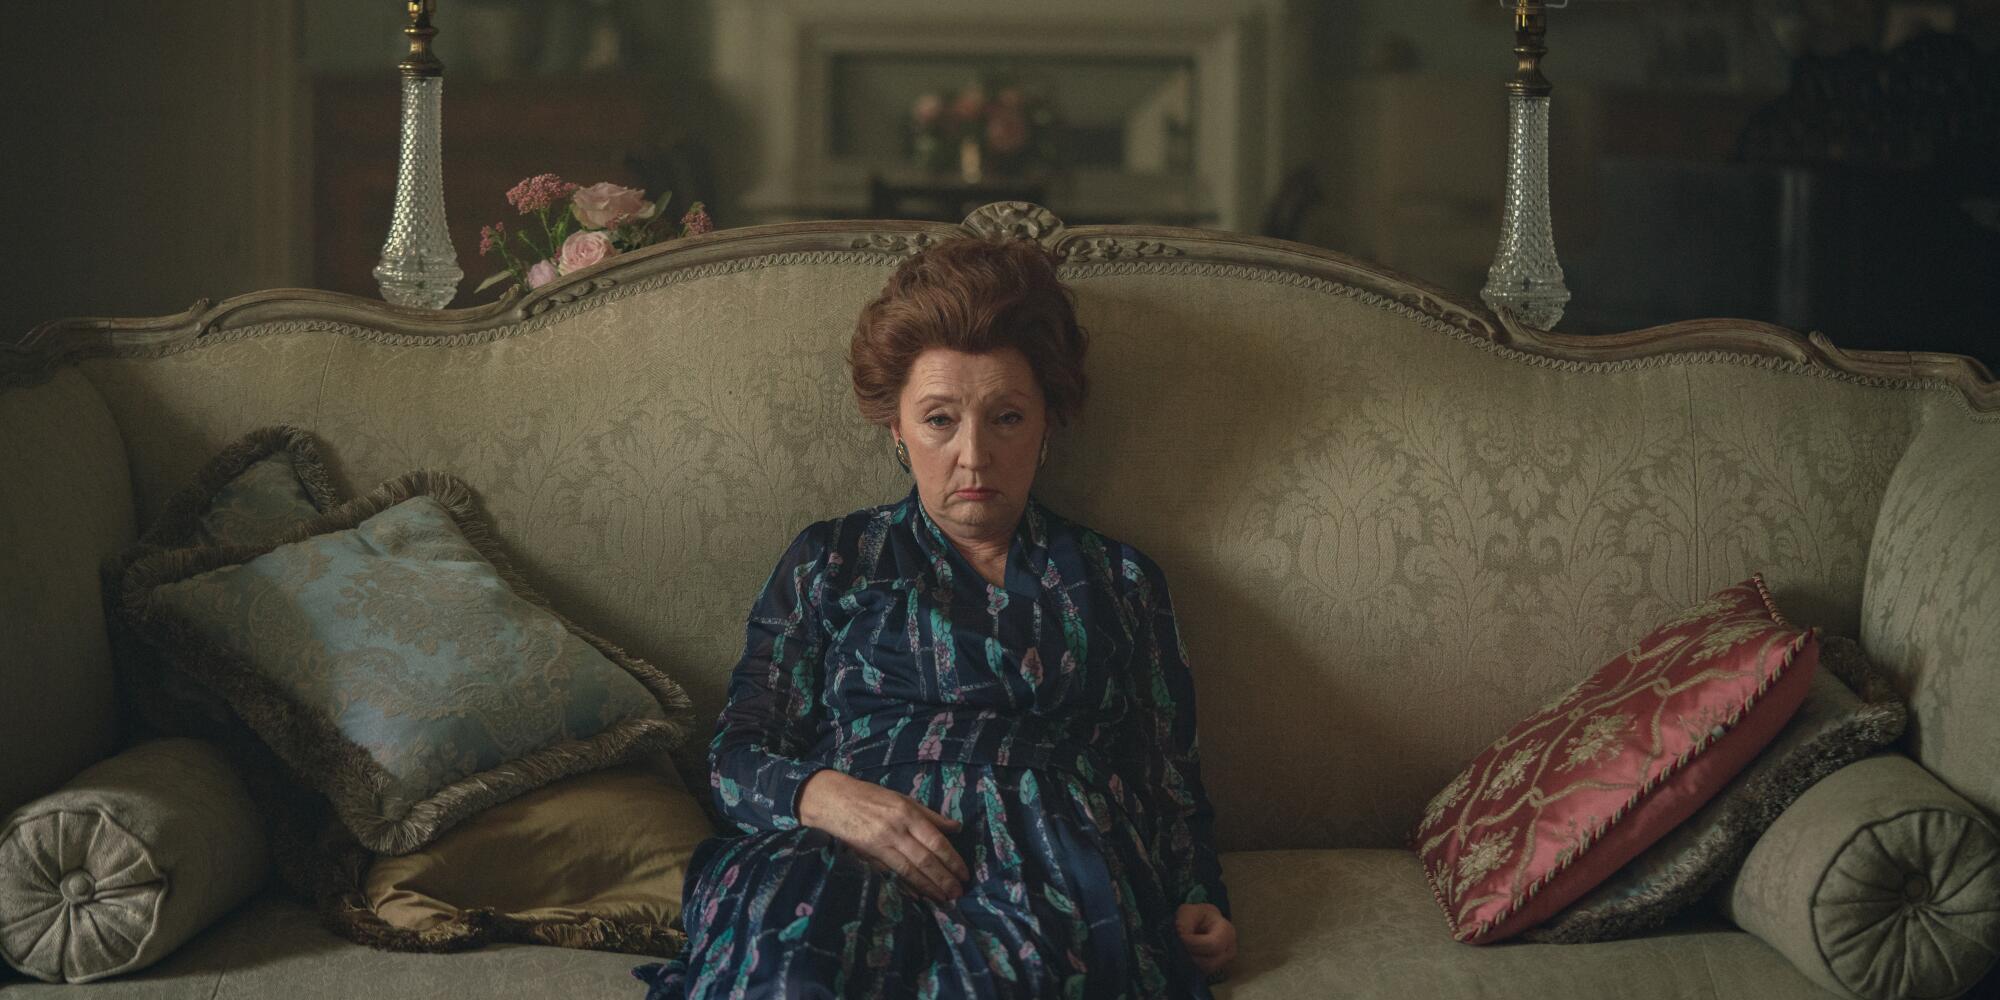 Lesley Manville as Princess Margaret in "The Crown."